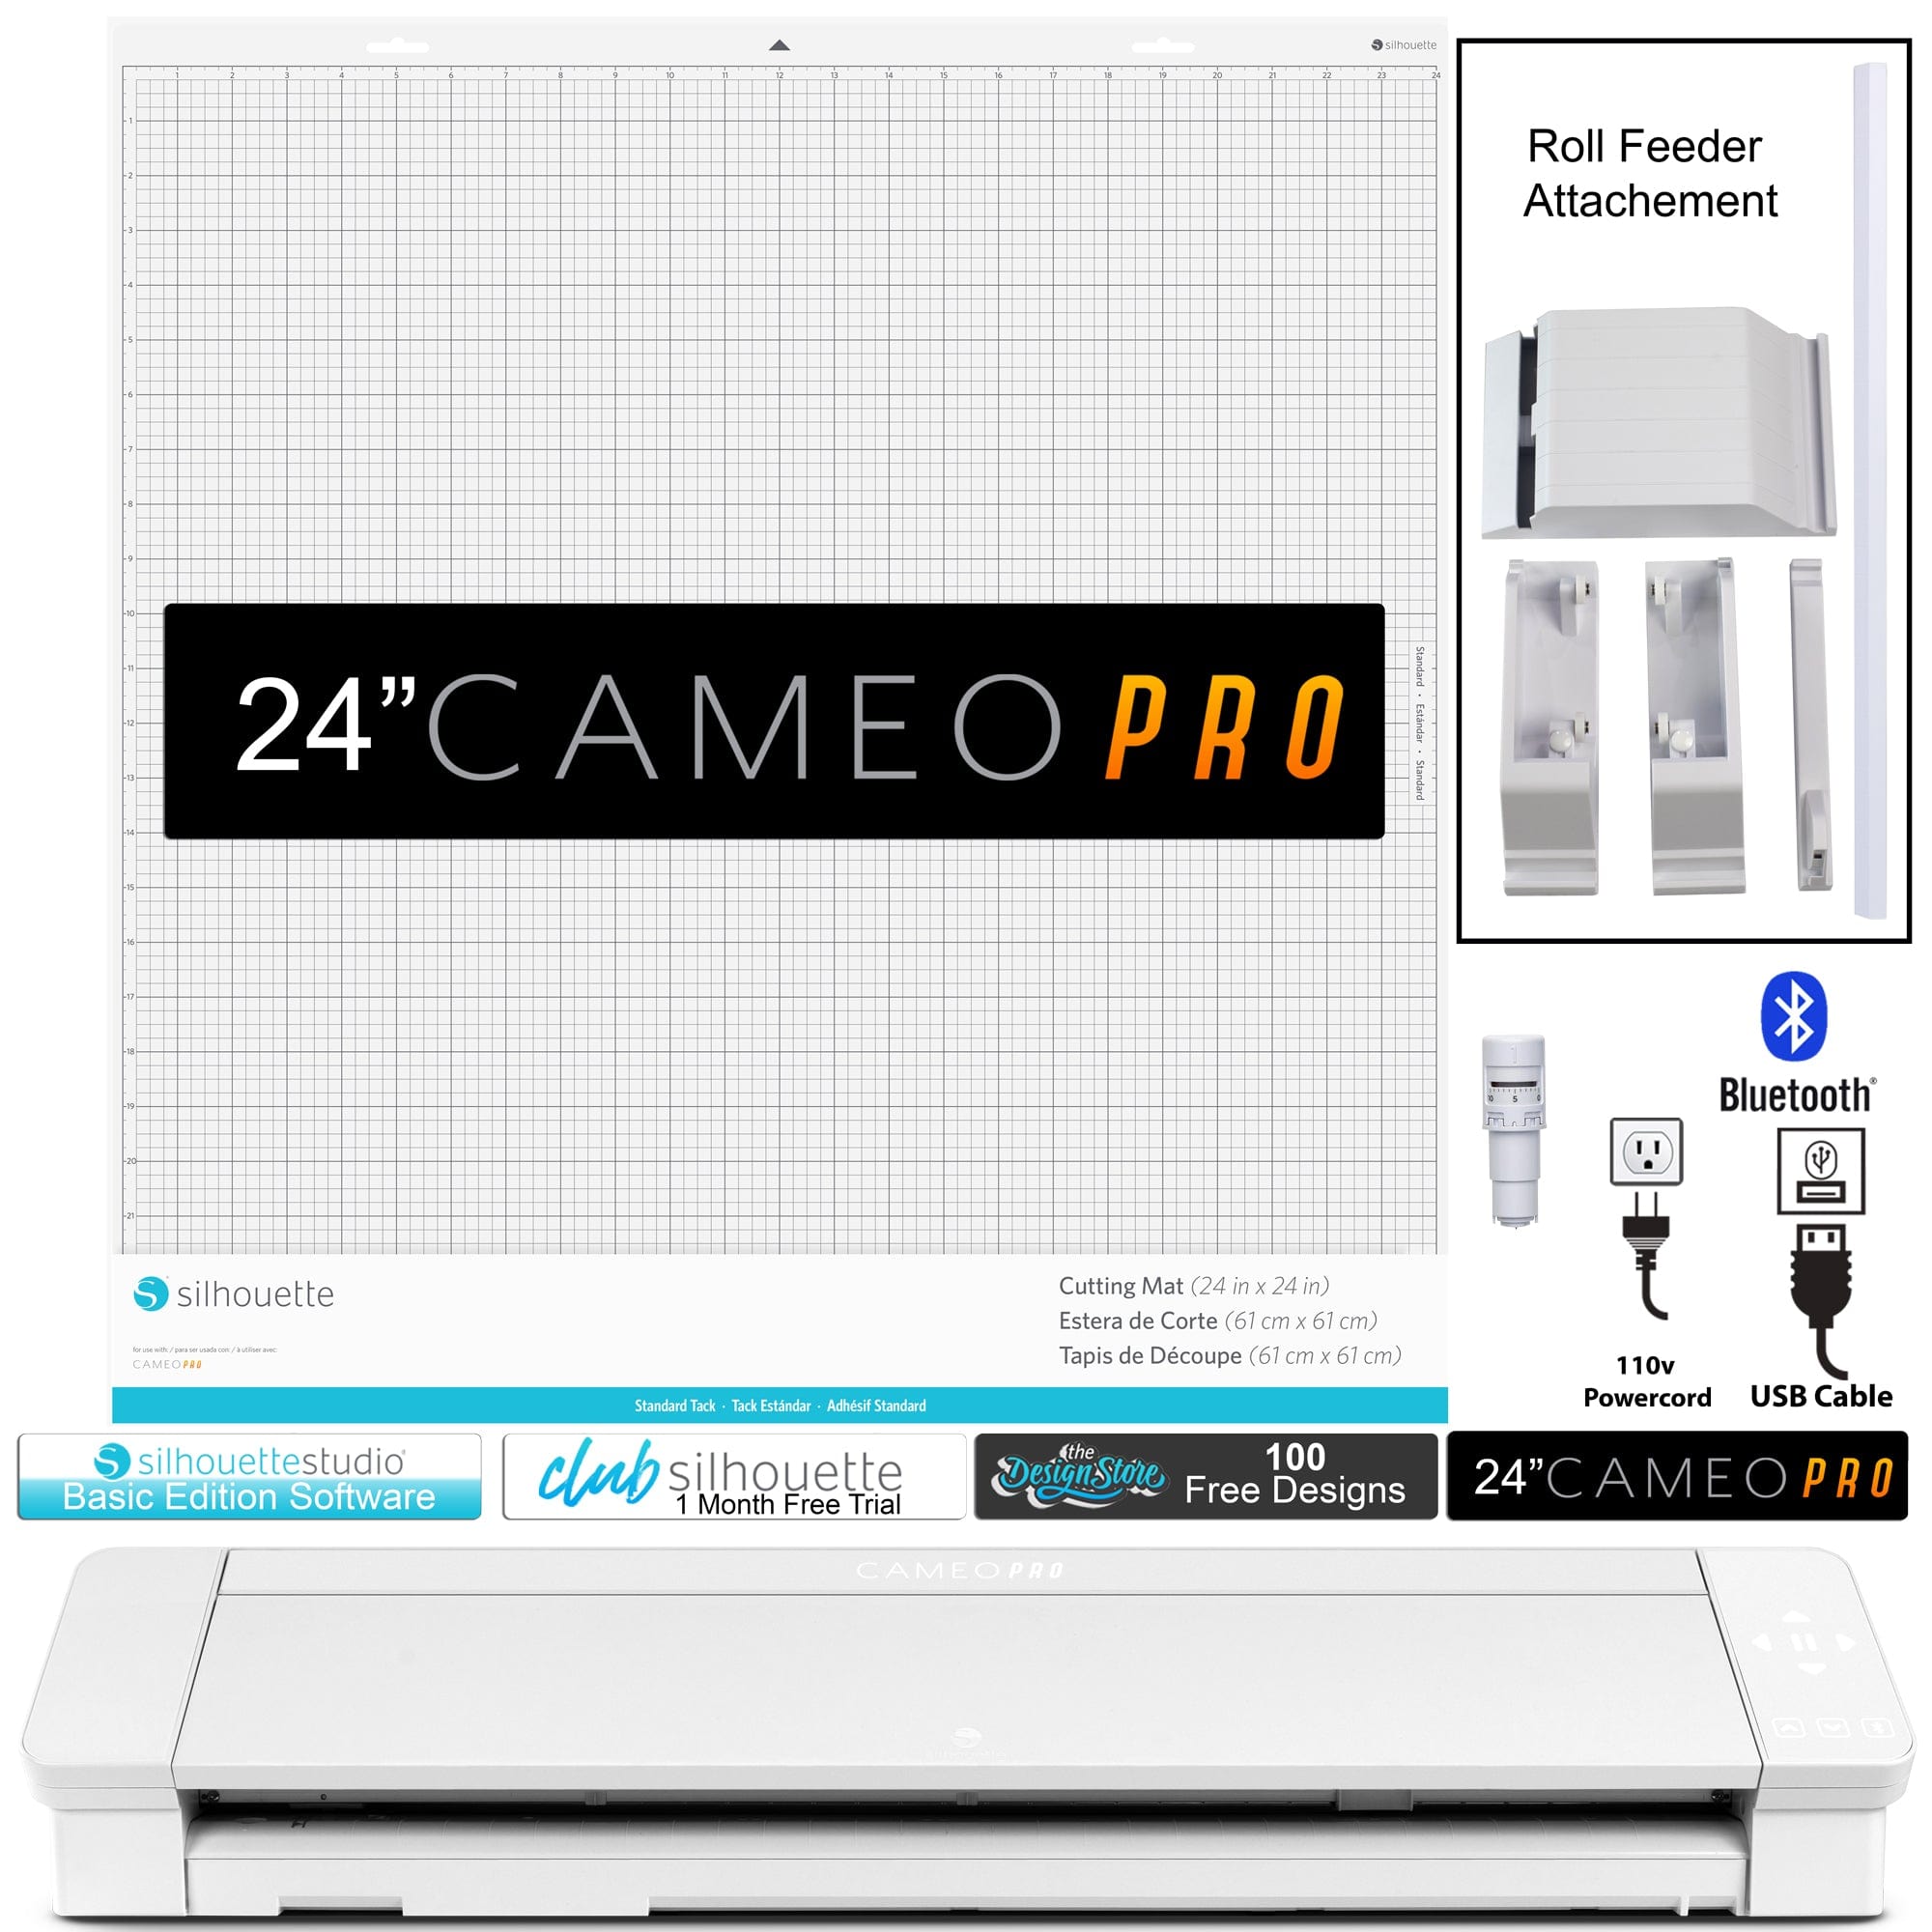 Silhouette America Silhouette Cameo 4 Pro Bundle with 4-3ft Rolls of Siser Heat Transfer, 5 Tephlon Sheets, Lexi Vinyl Tool Kit, 100, and Access to 12+ Ebooks, Classed, Project Ideas and More.